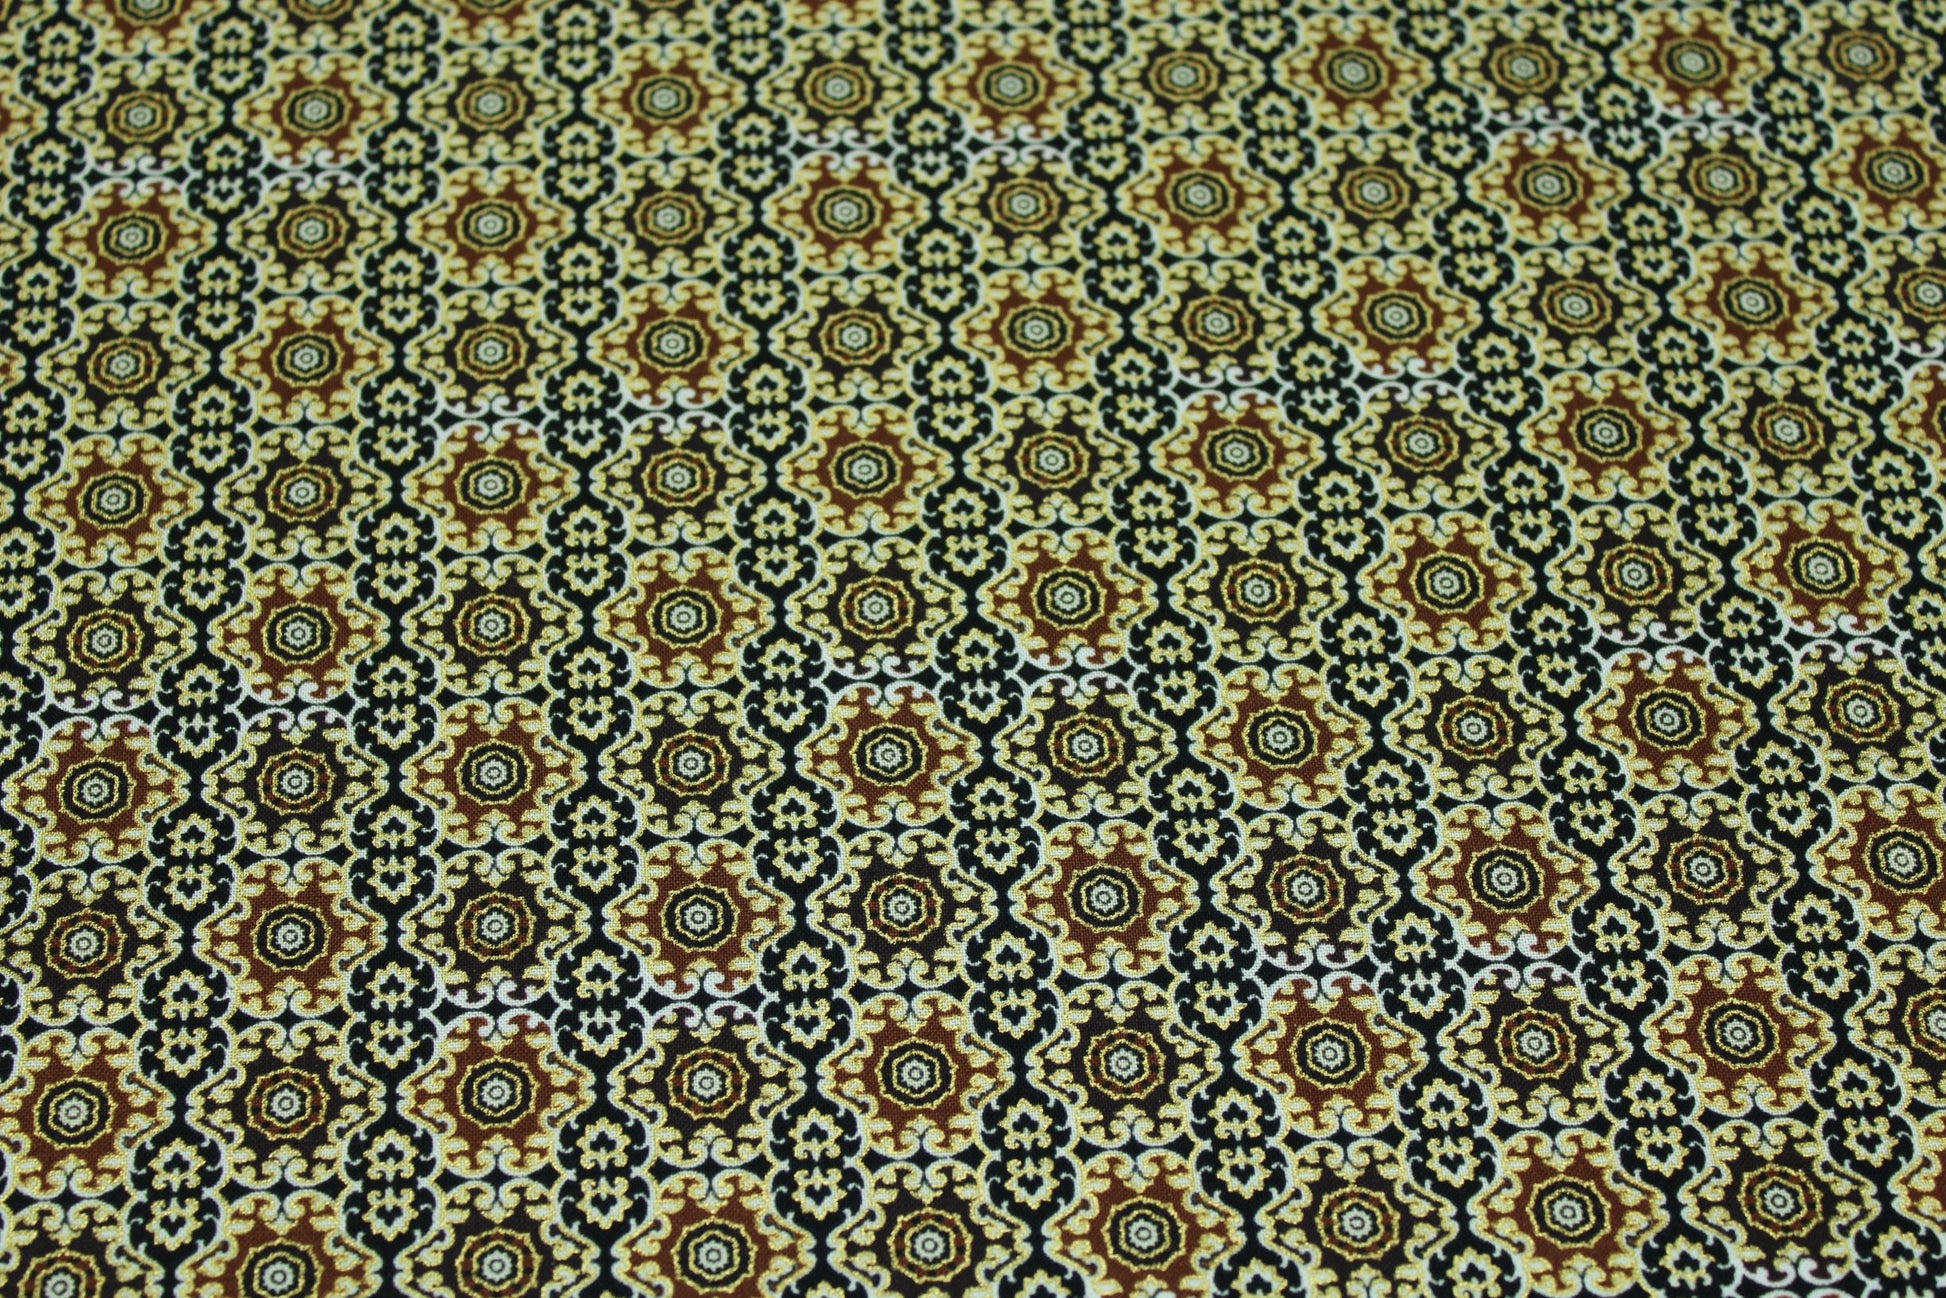 Black/brown/beige maroccan inspired goldedged cotton fabric intricate pattern